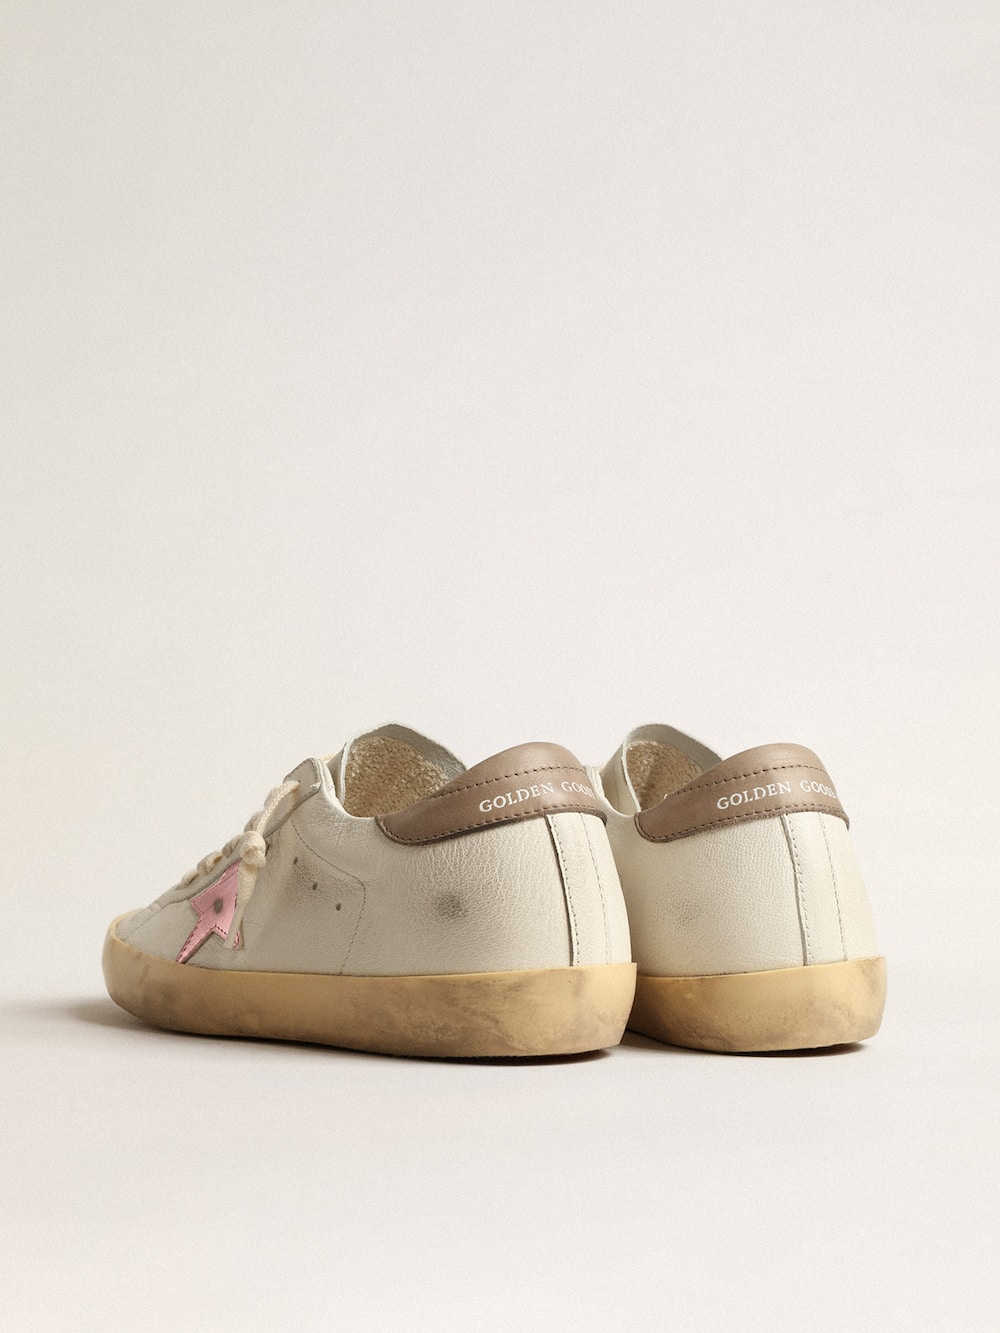 Golden Goose - Women's Super-Star in white nappa with pink metallic leather star in 